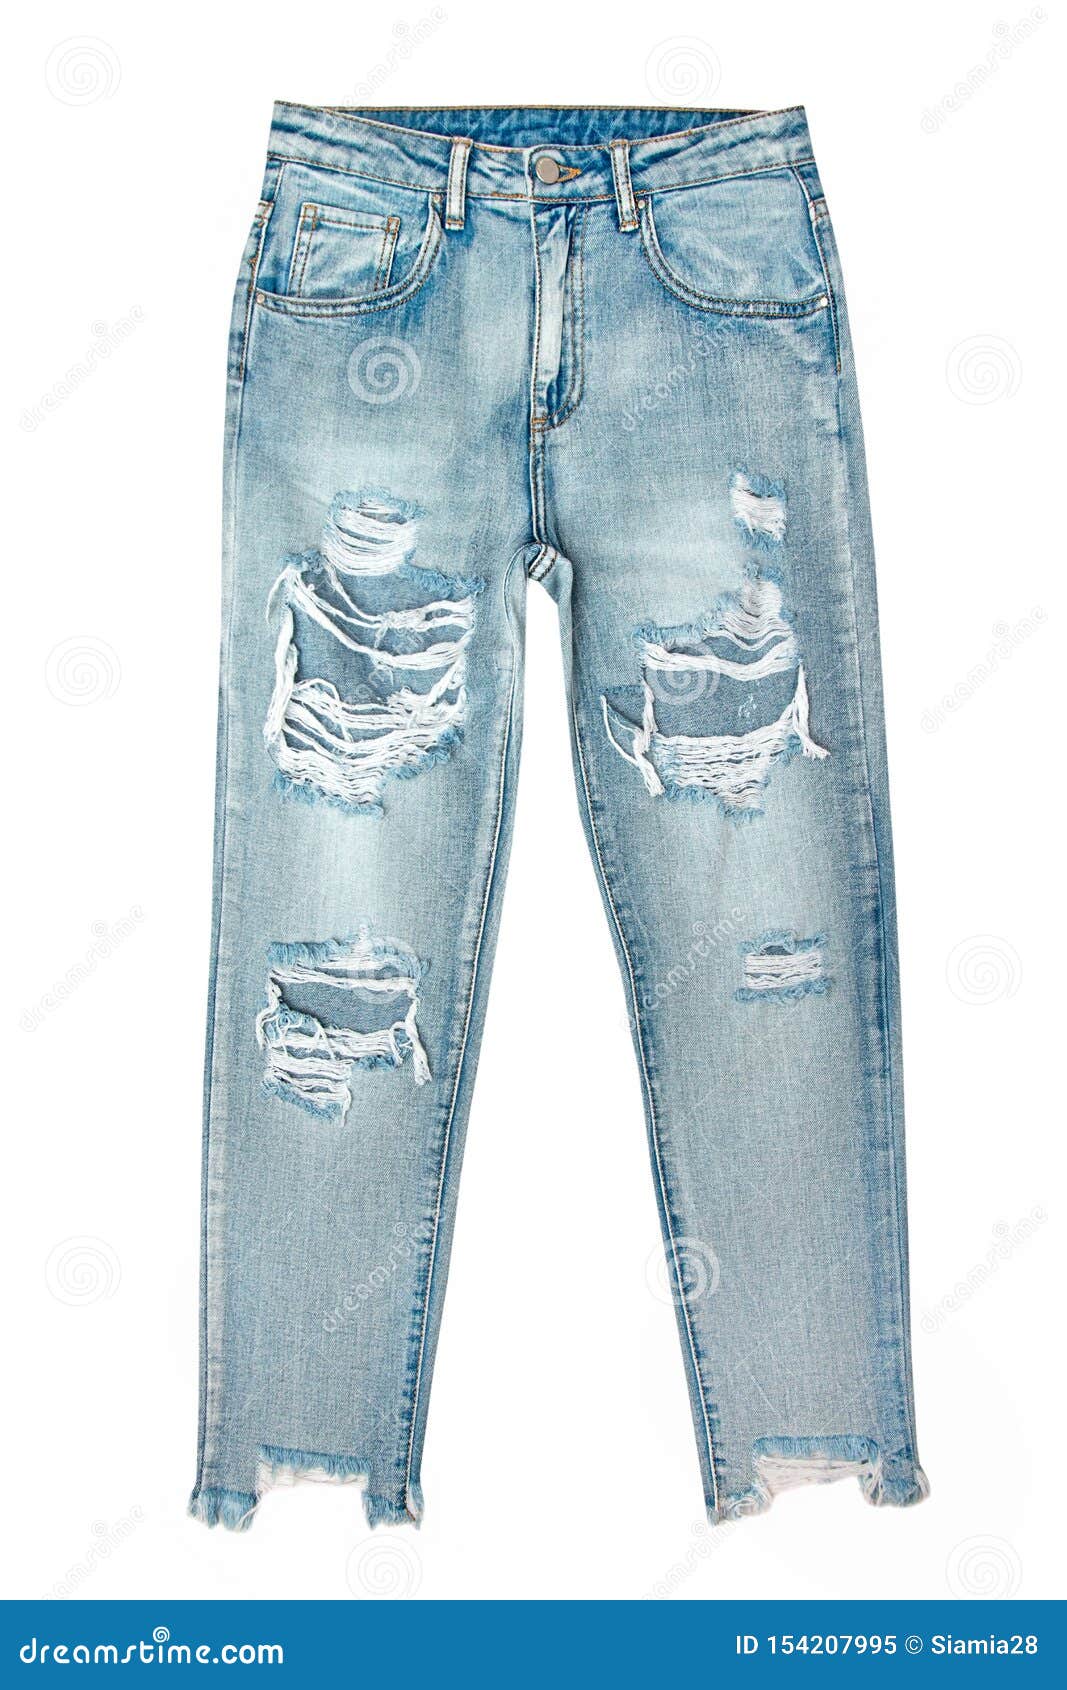 Women`s Blue Jeans with Holes Isolated on White Background Stock Image - of collage, clothes: 154207995